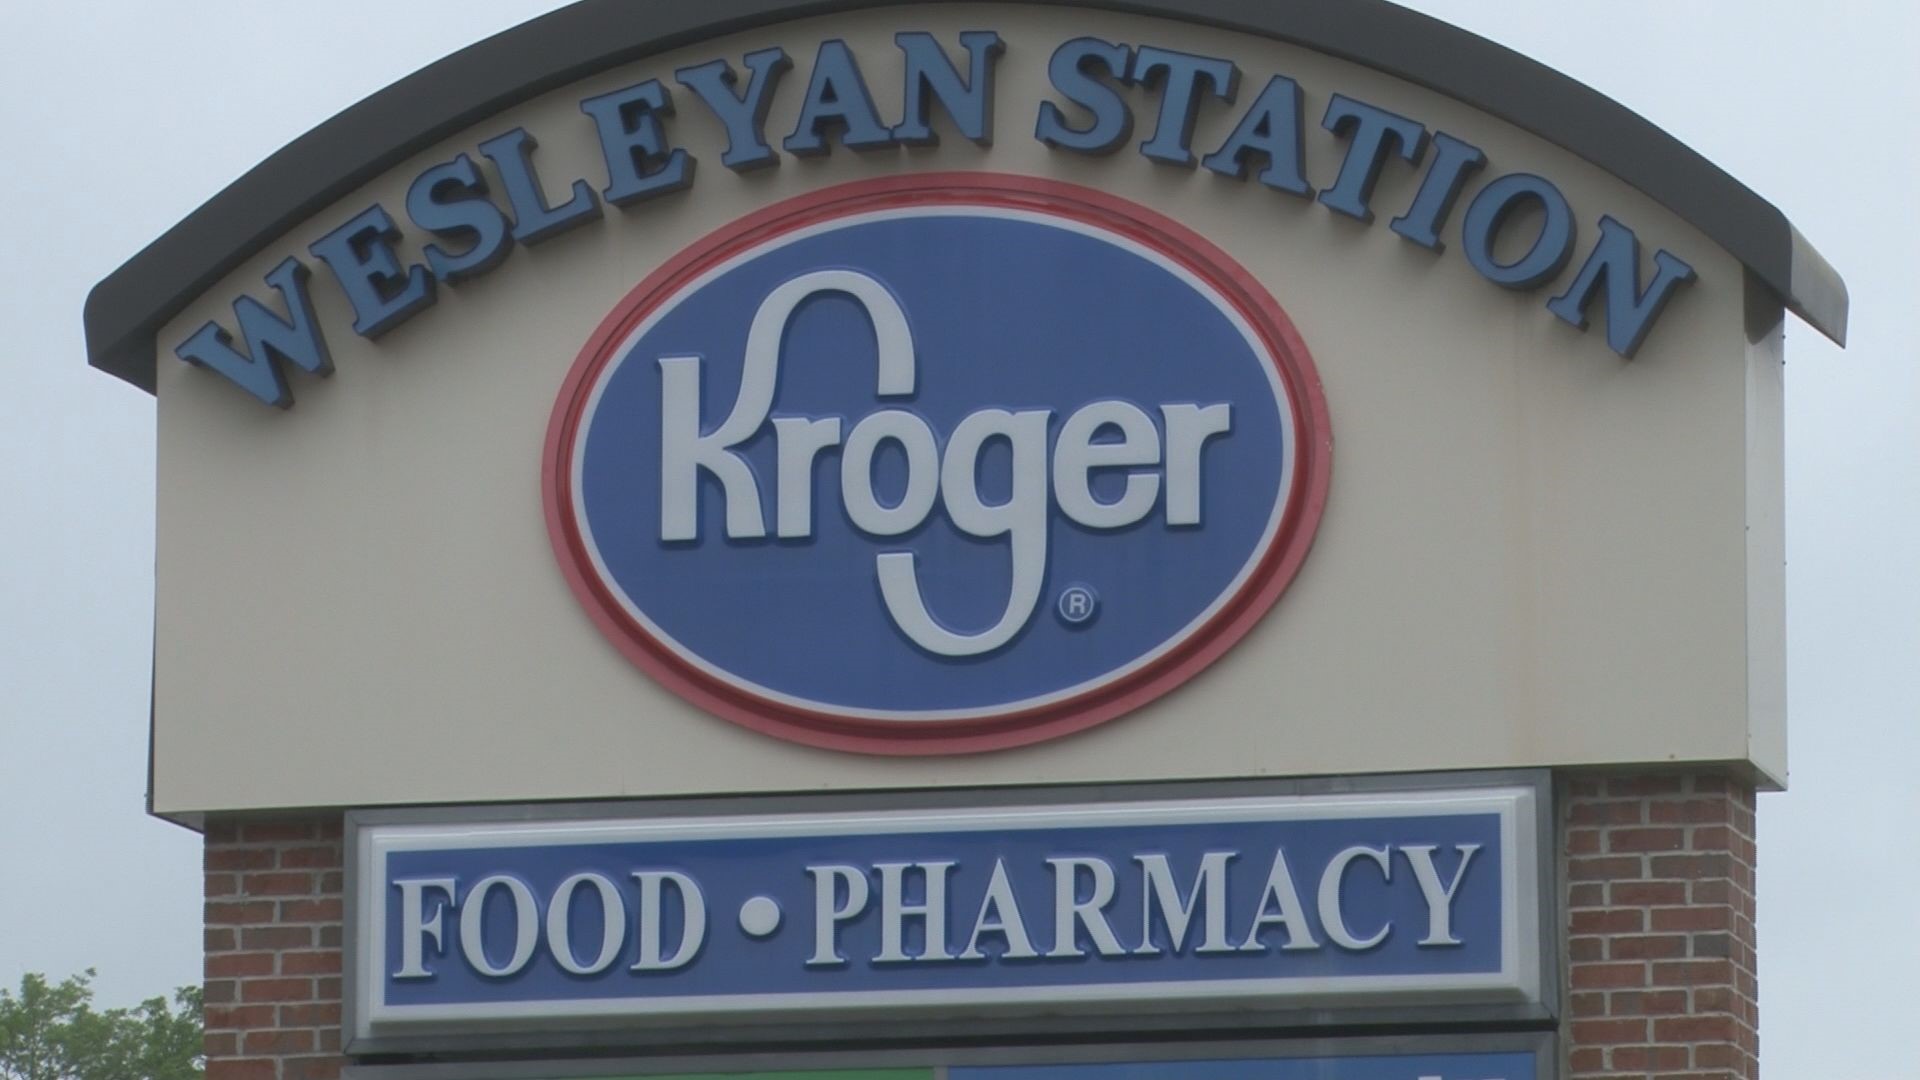 Kroger's Corporate Affairs manager says they're ready to move forward as soon as they get permits from the deeds that are held up in court